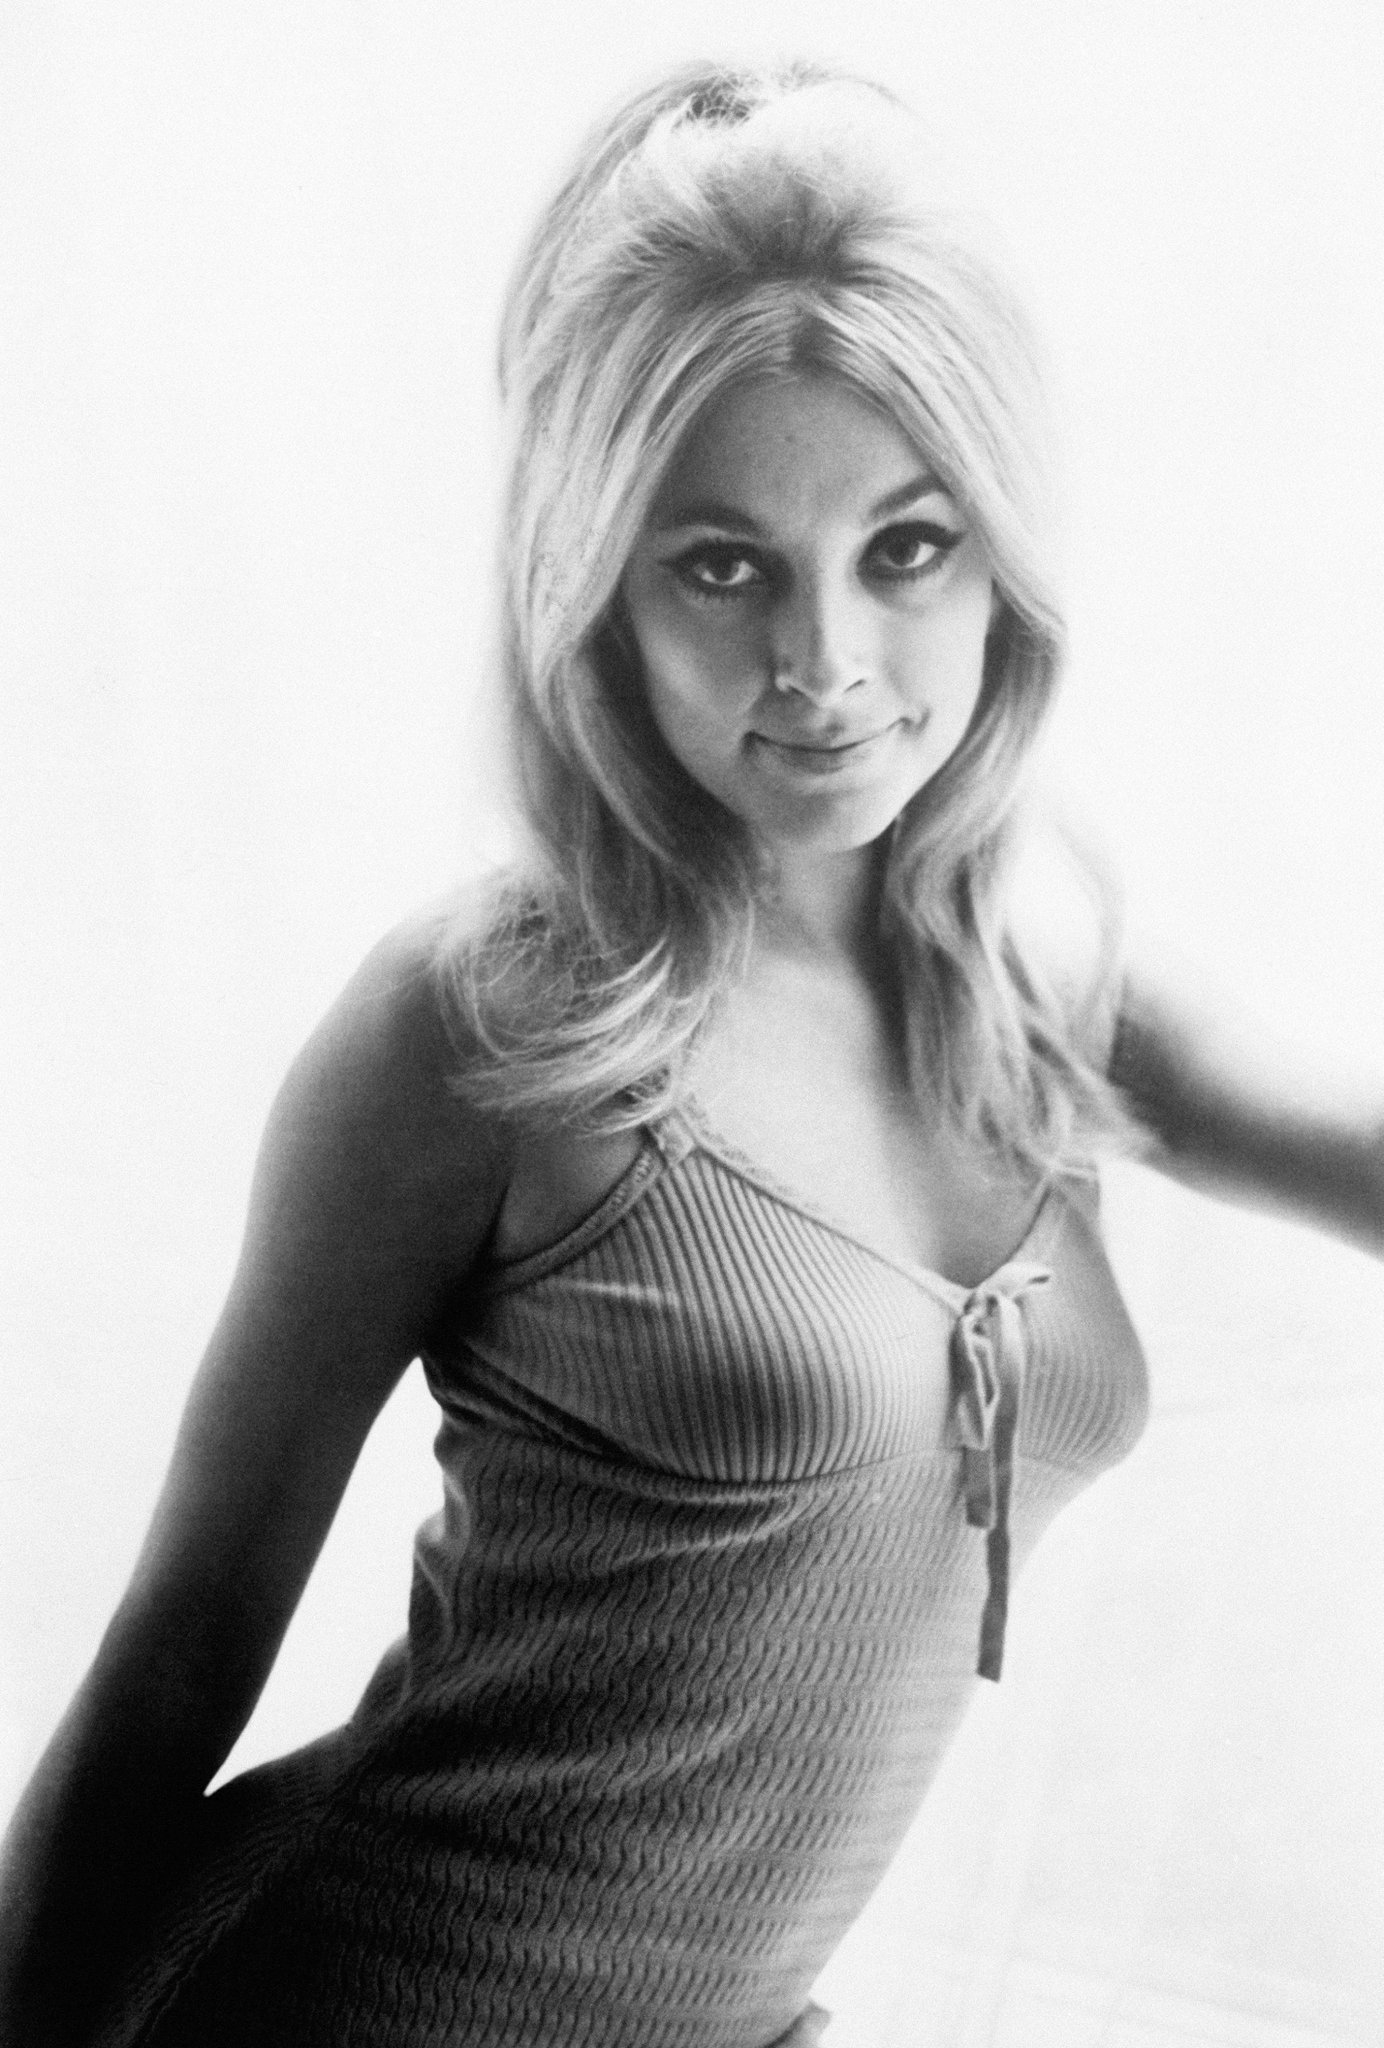 Happy heavenly birthday to Sharon Tate, born in Dallas, TX 80 years ago today. 